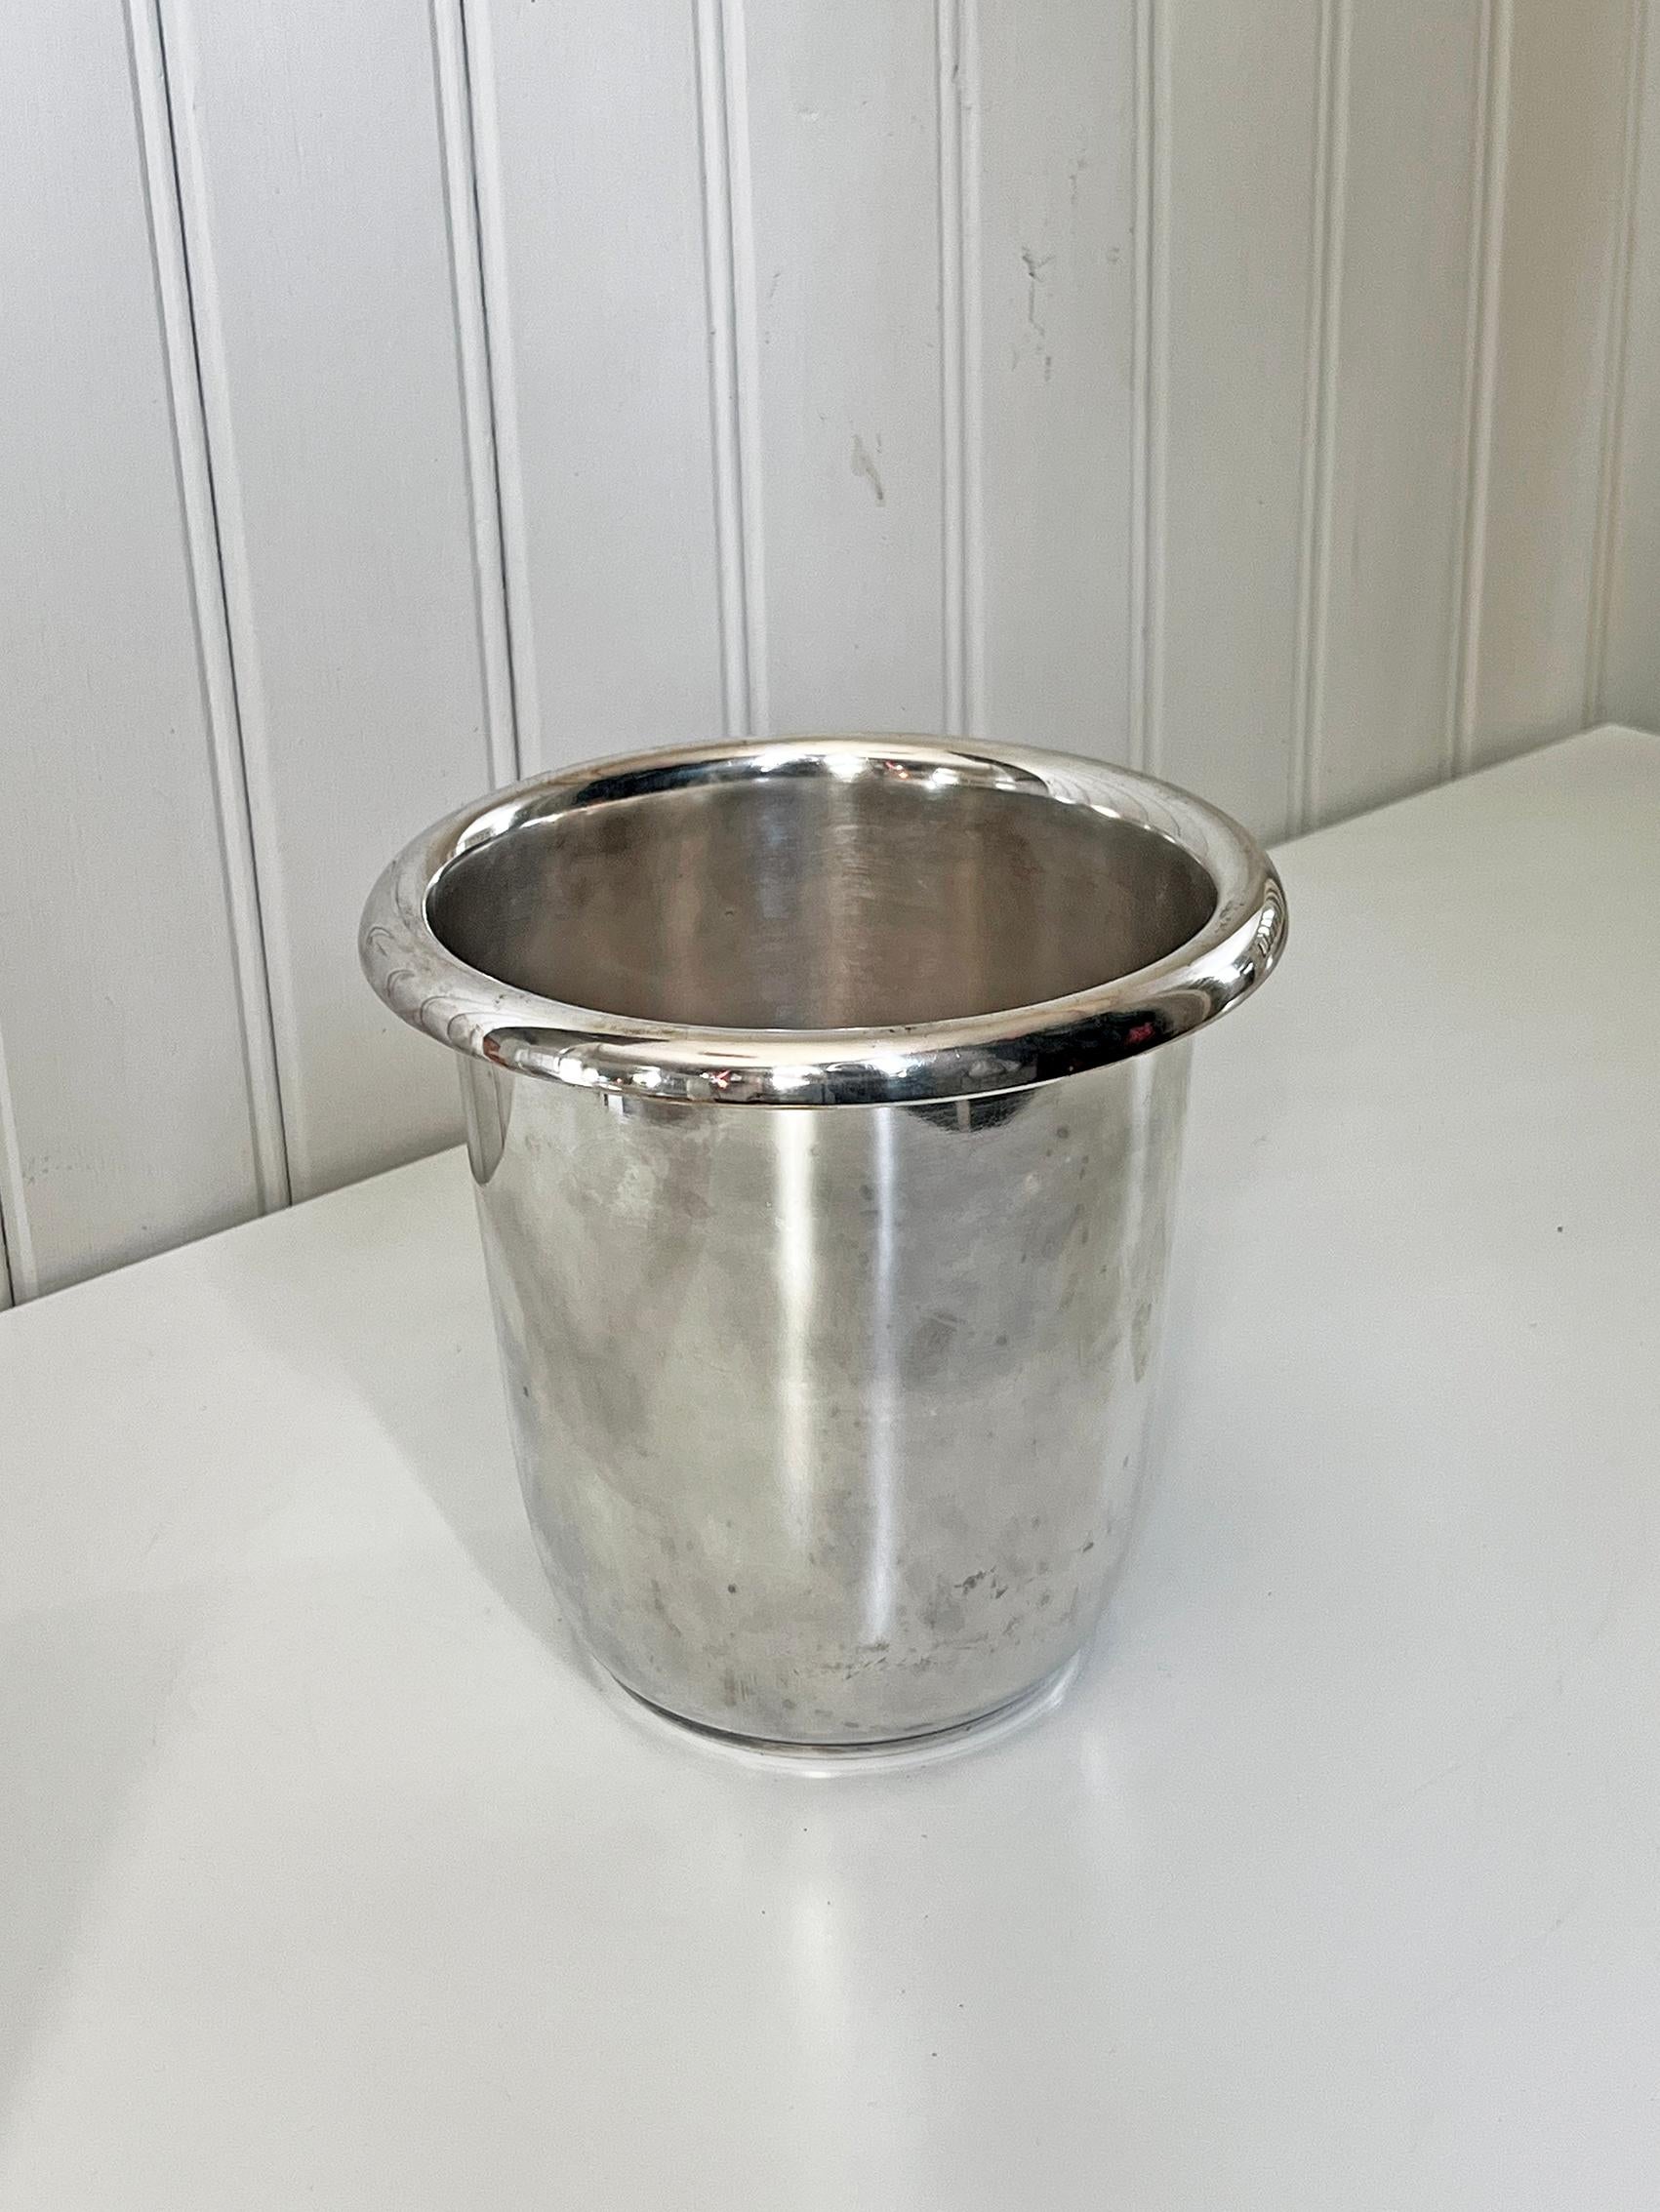 Rare scandinavian modern silver plated vine or champagne cooler from FAK ( Fabriksaktiebolaget Kronsilver) ca 1930-1940's. Signed with makers mark.
Wear and patina consistent with age and use. Marks, scratches. Smaller dents, as seen on the last